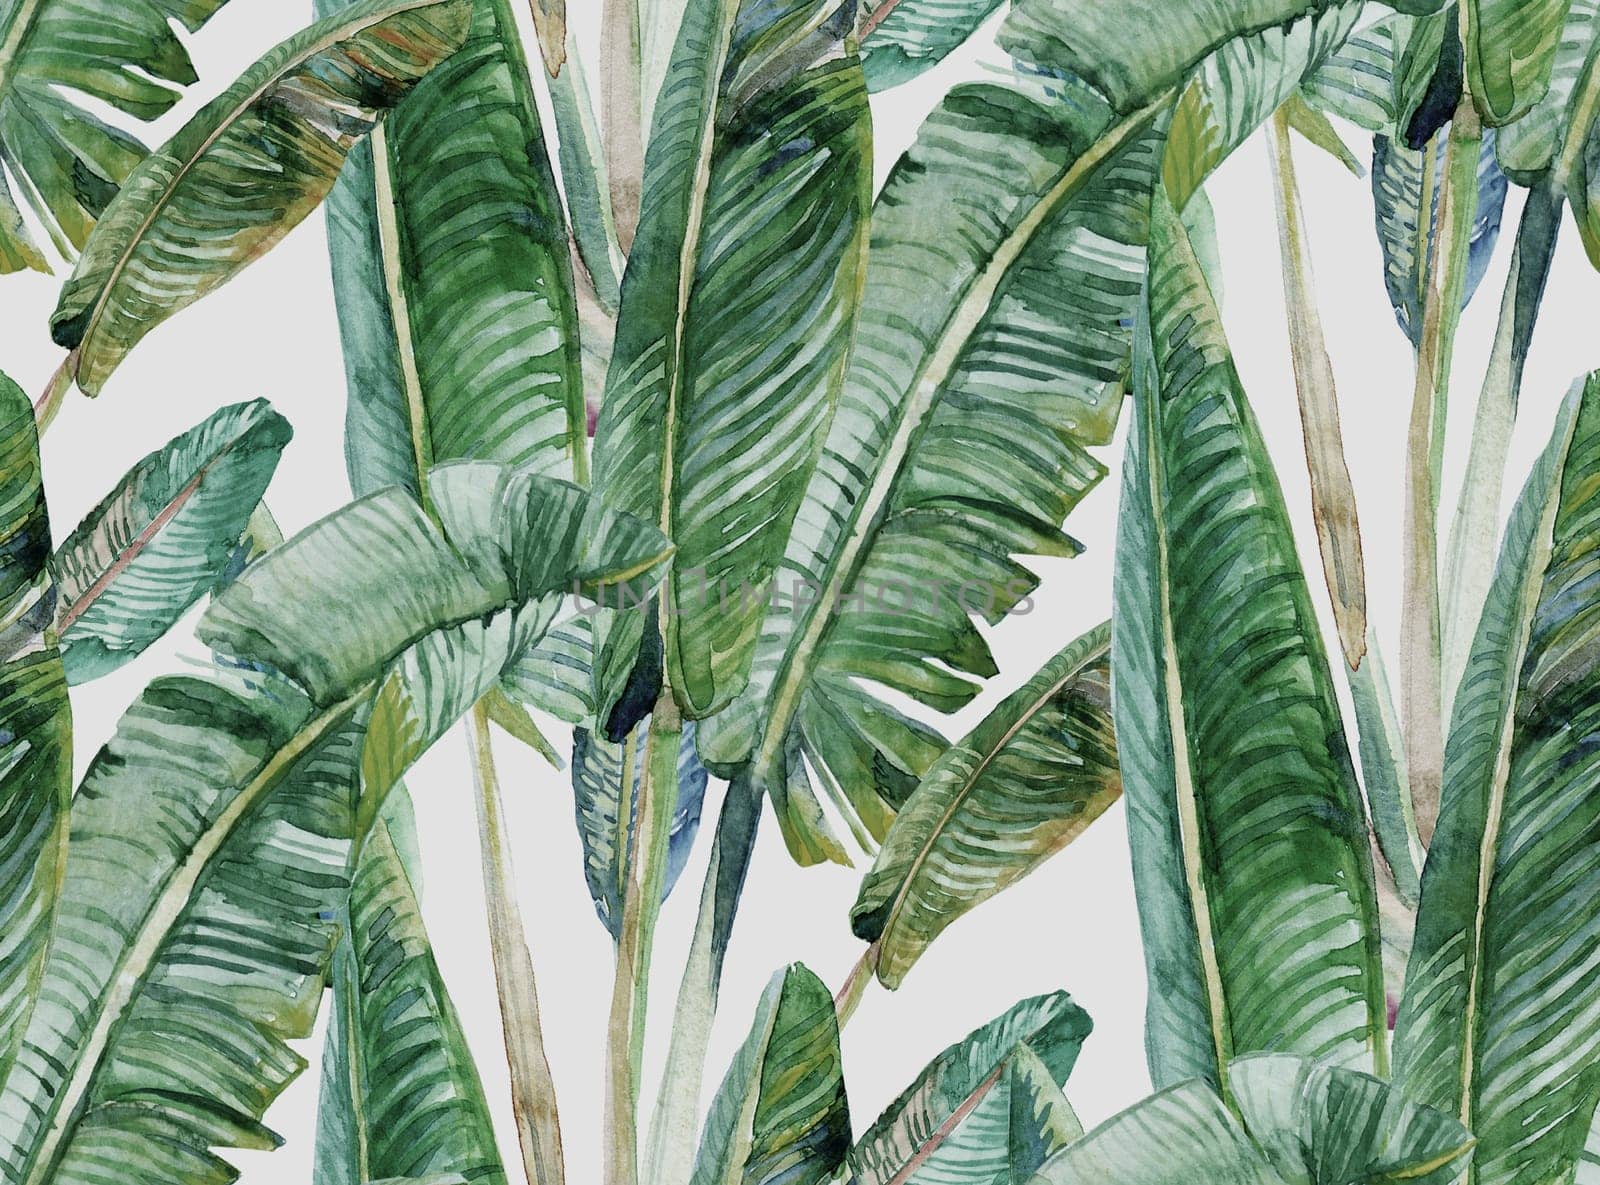 seamless pattern with watercolor banana palms in khaki shades on a gray background